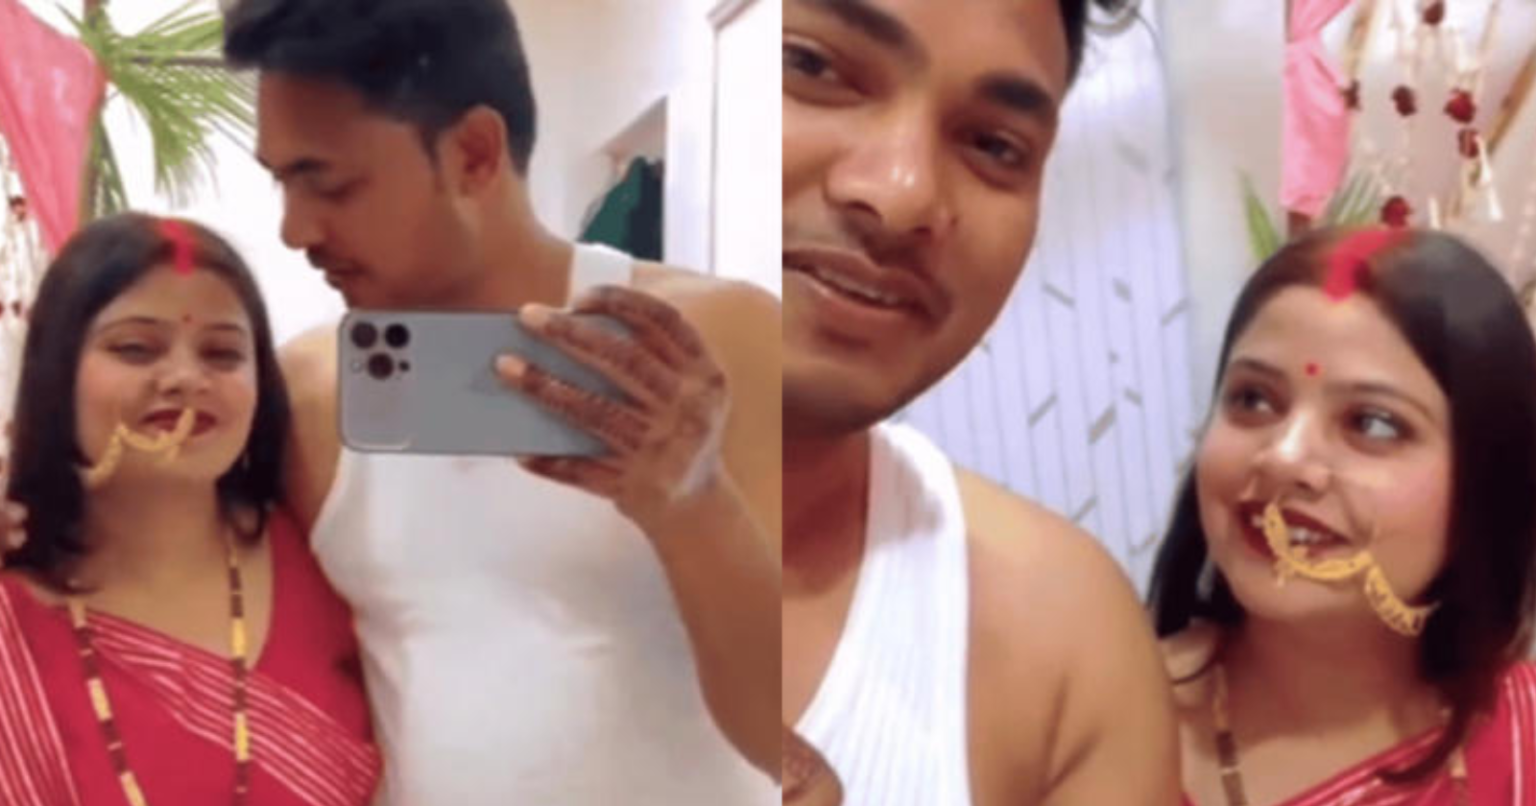 Couple’s ‘Suhagraat’ Vlog Goes Viral on Social Media; Trolls React ‘What’s Left to See?’